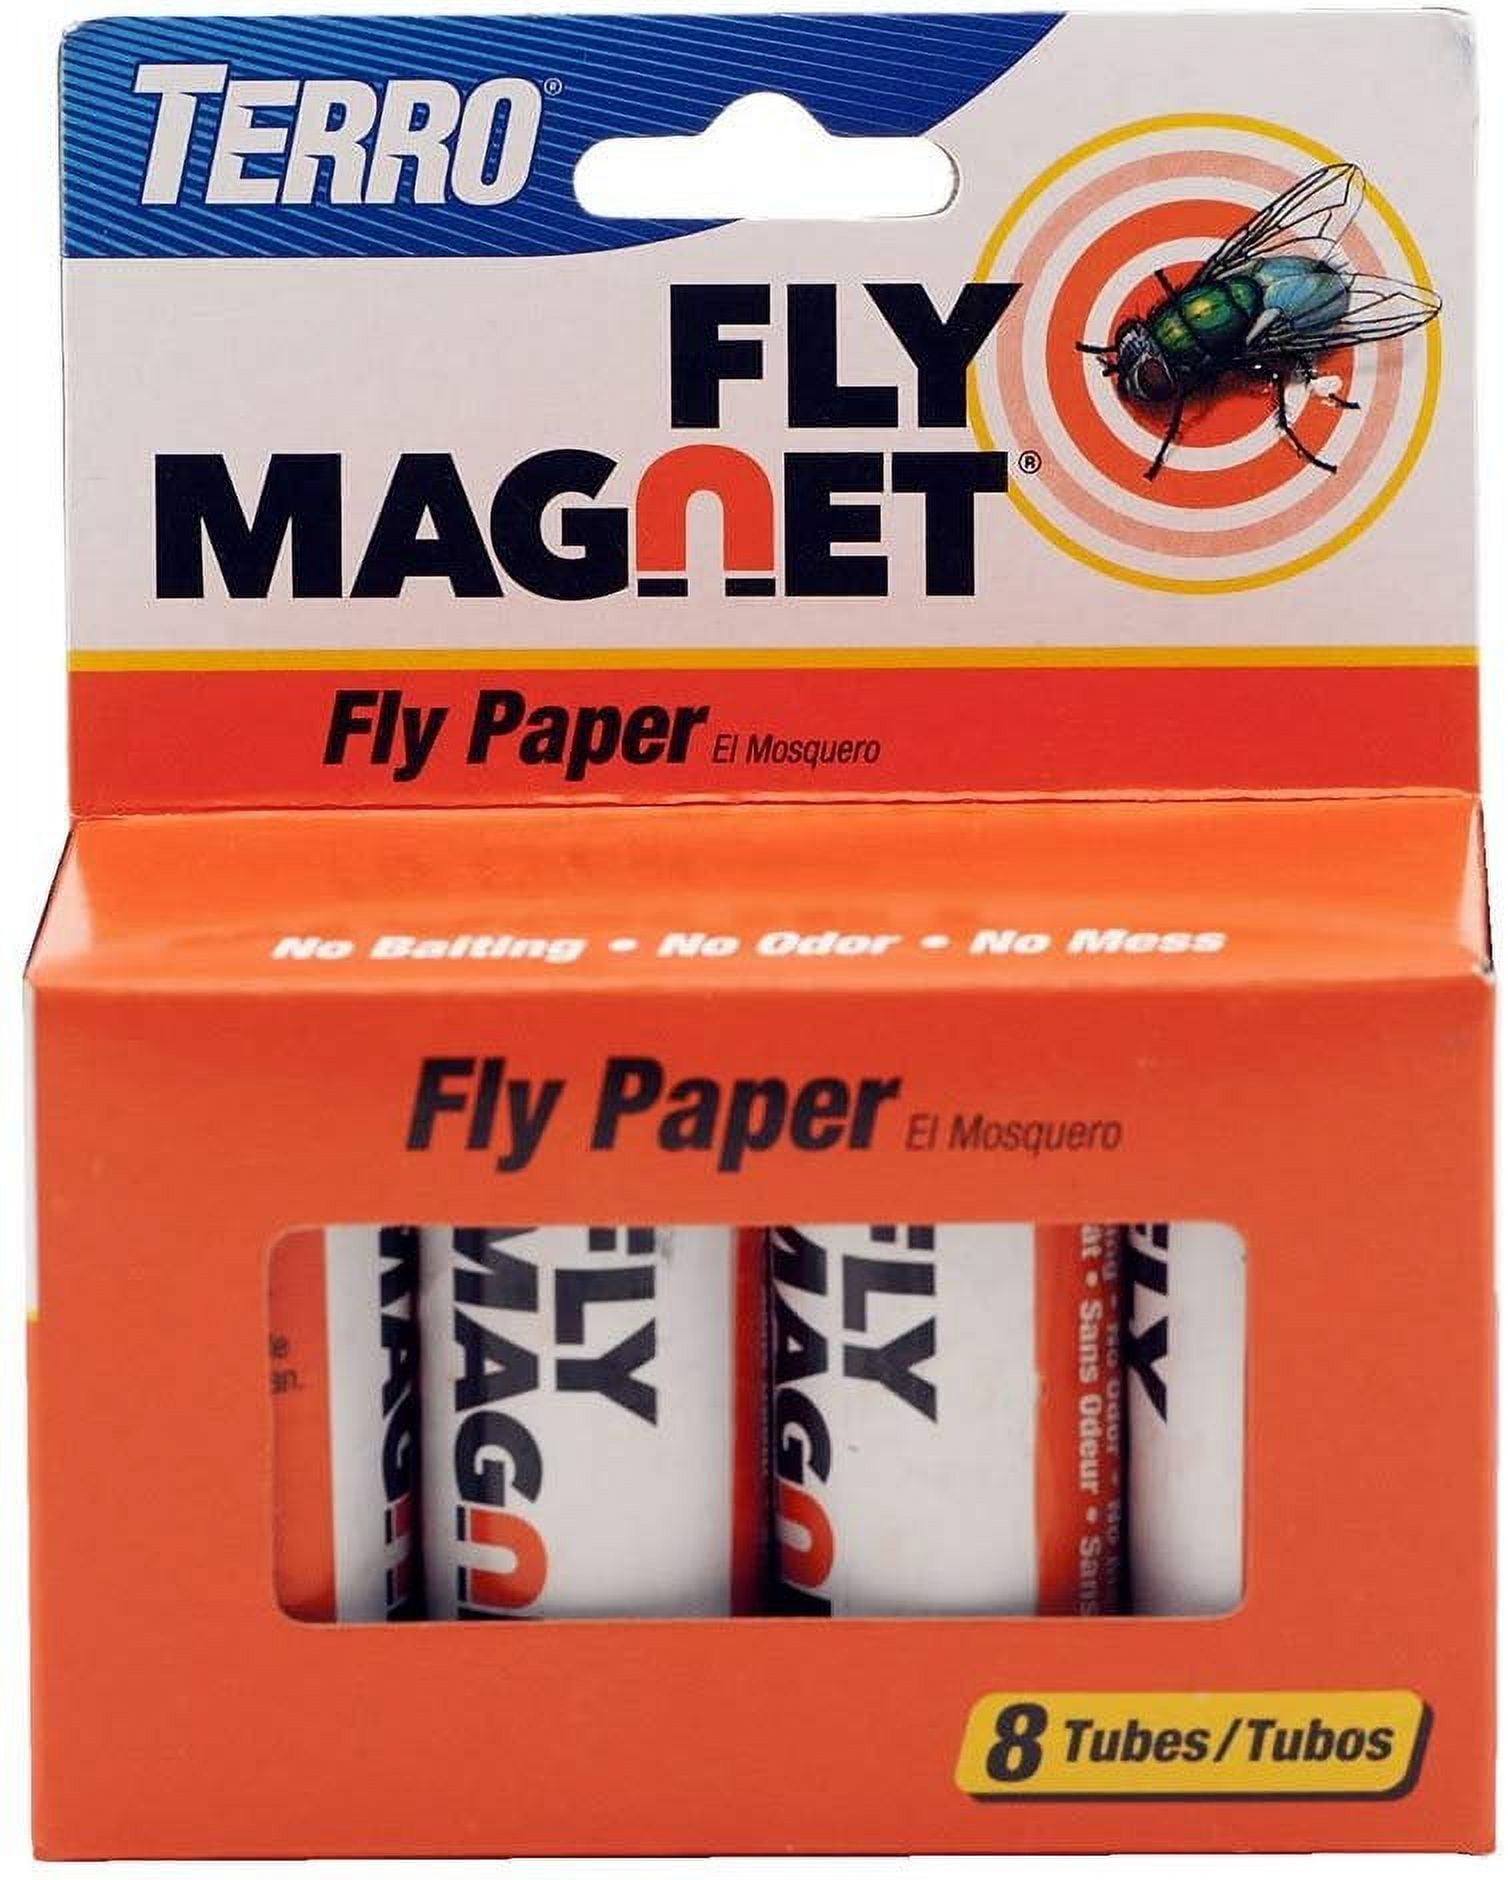 Fly Papers - 8 Pack - Zero In Official Manufacturer